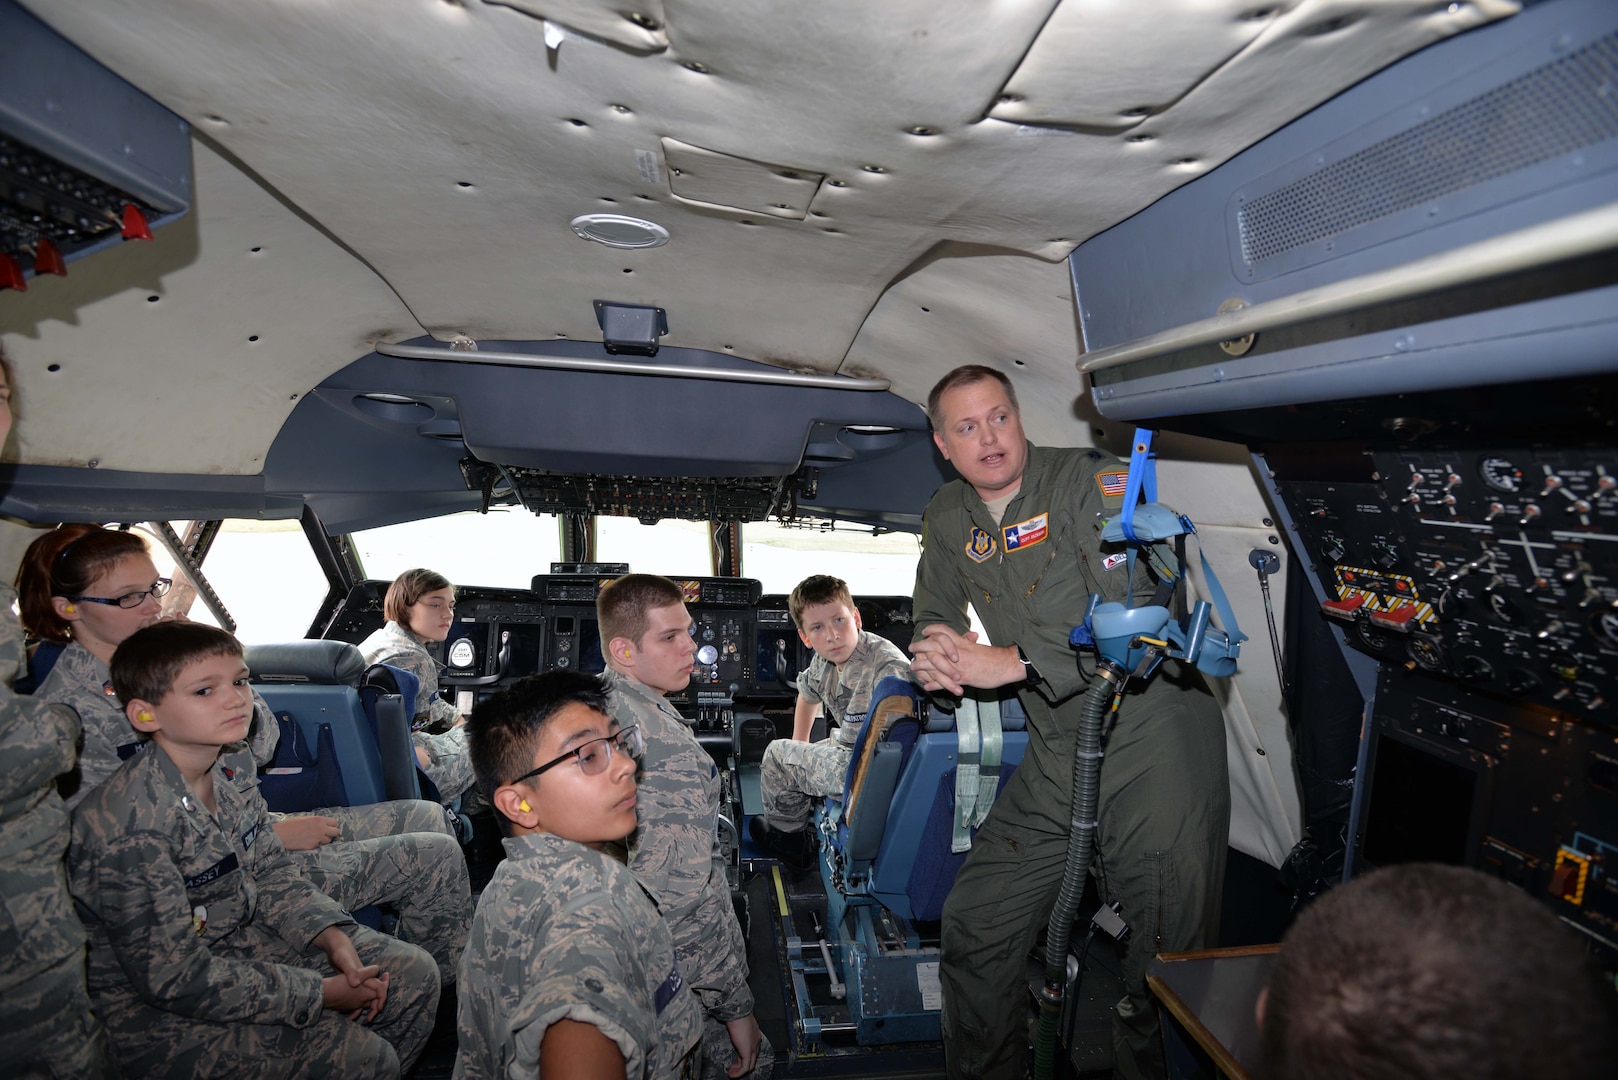 Lt. Col. Cliff Jackson, 68th Airlift Squadron pilot, describes the C-5M Super Galaxy flight engineer station to Civil Air Patrol cadets Nov. 6, 2019 at Joint Base San Antonio-Lackland, Texas (U.S. Air Force photo by Master Sgt. Kristian Carter)